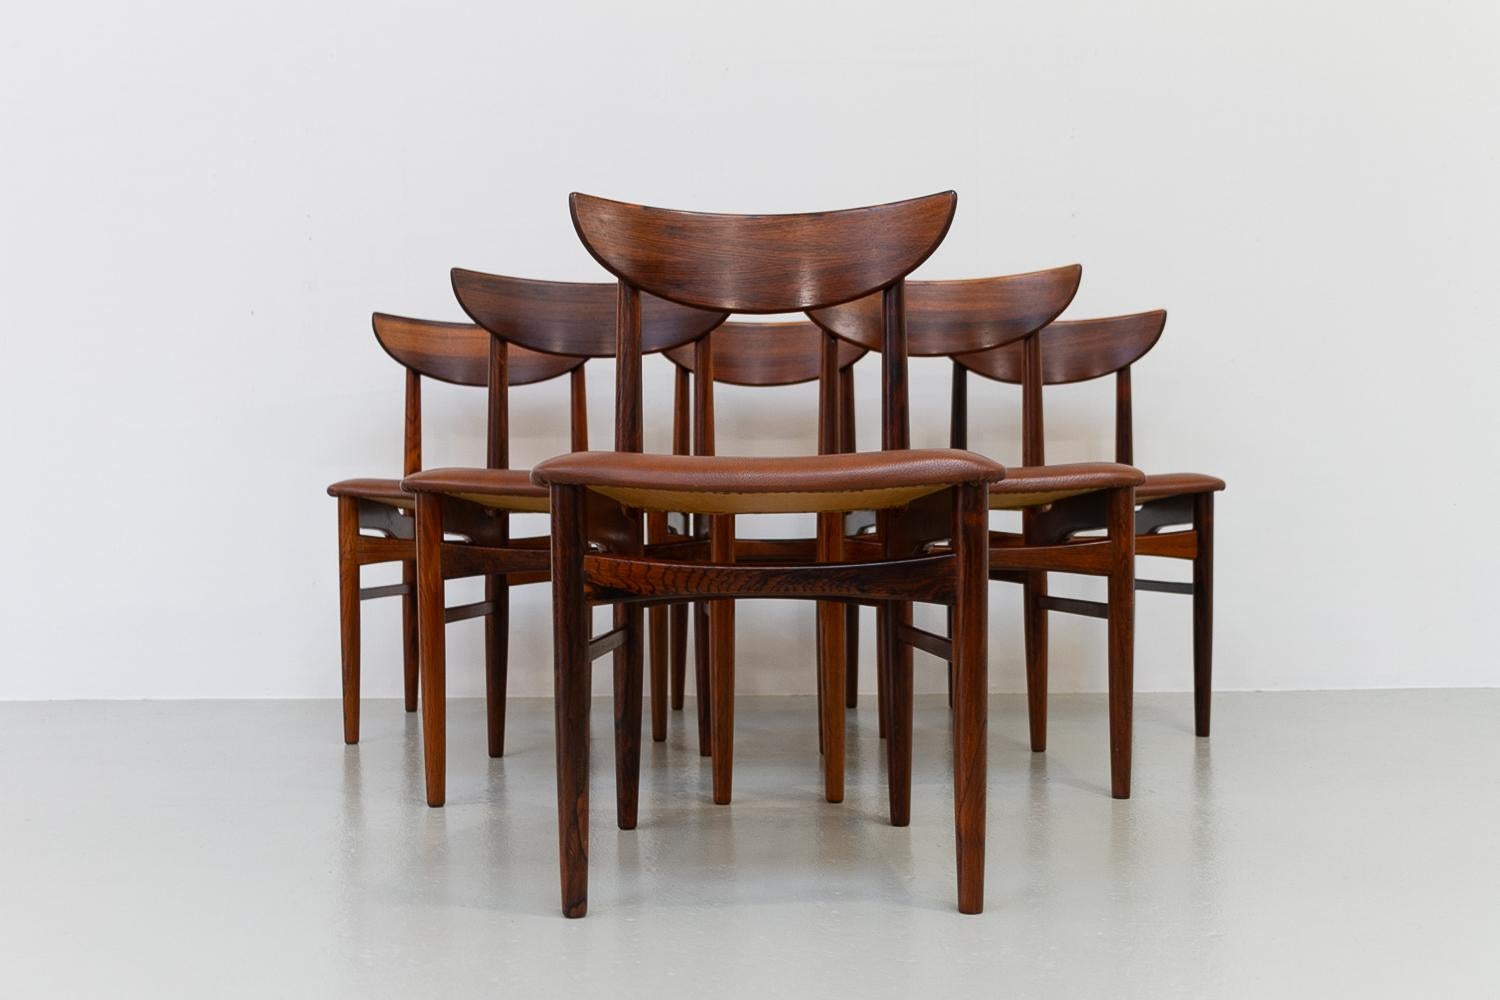 Scandinavian Modern Vintage Danish Rosewood Dining Chairs by E.W. Bach for Skovby, 1960s. Set of 6. For Sale